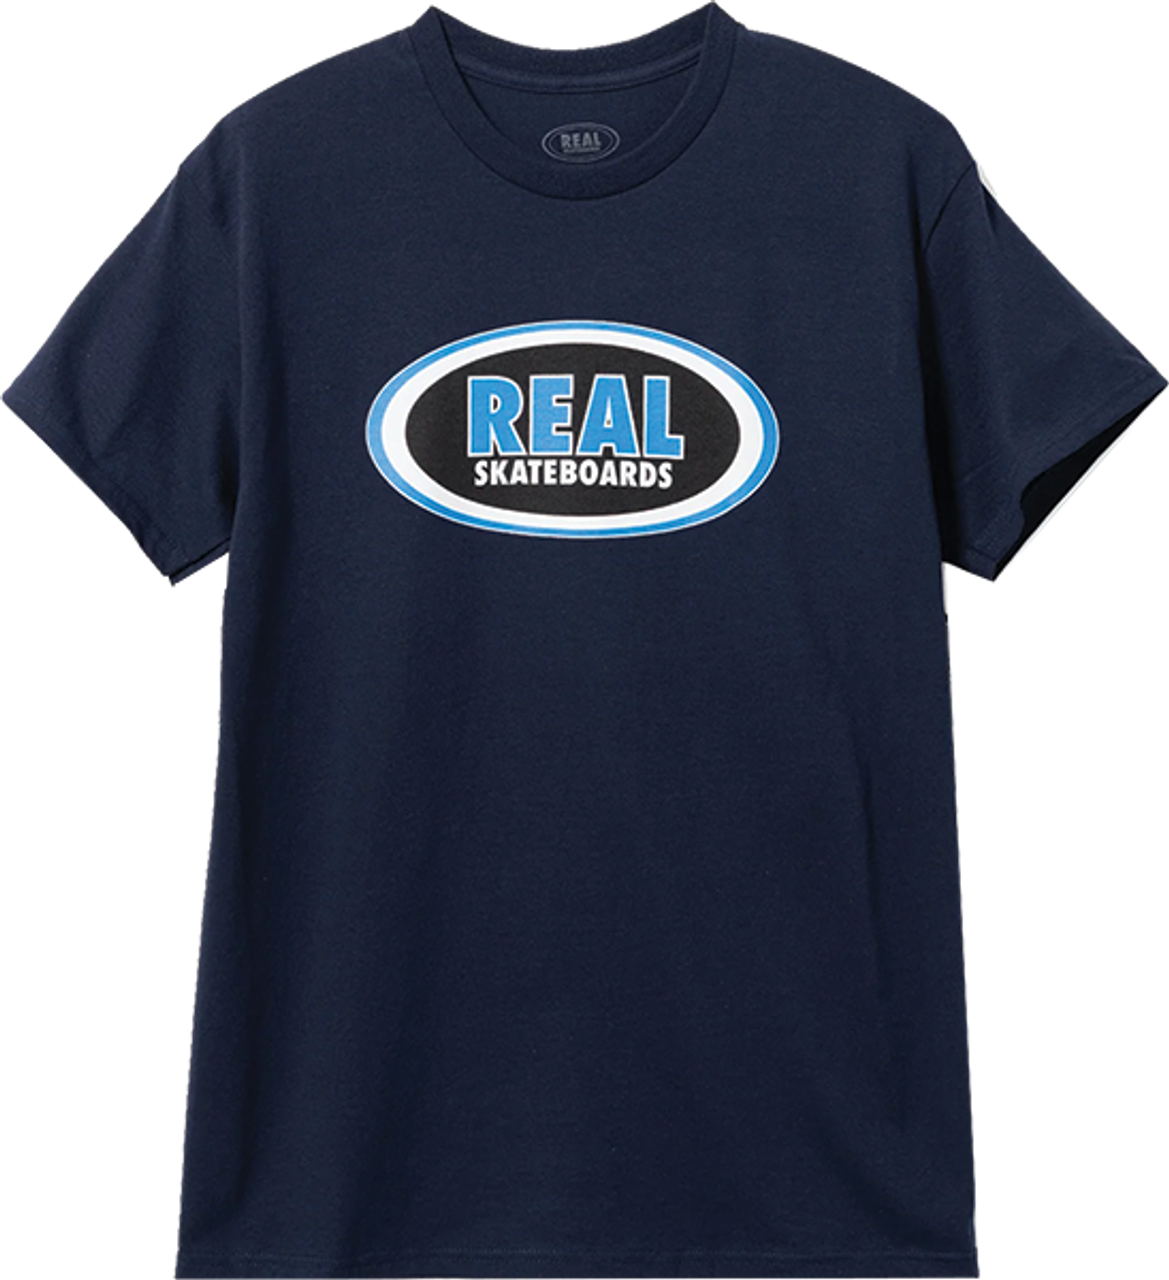 REAL OVAL SS TSHIRT SMALL NAVY BLU BLK WHT